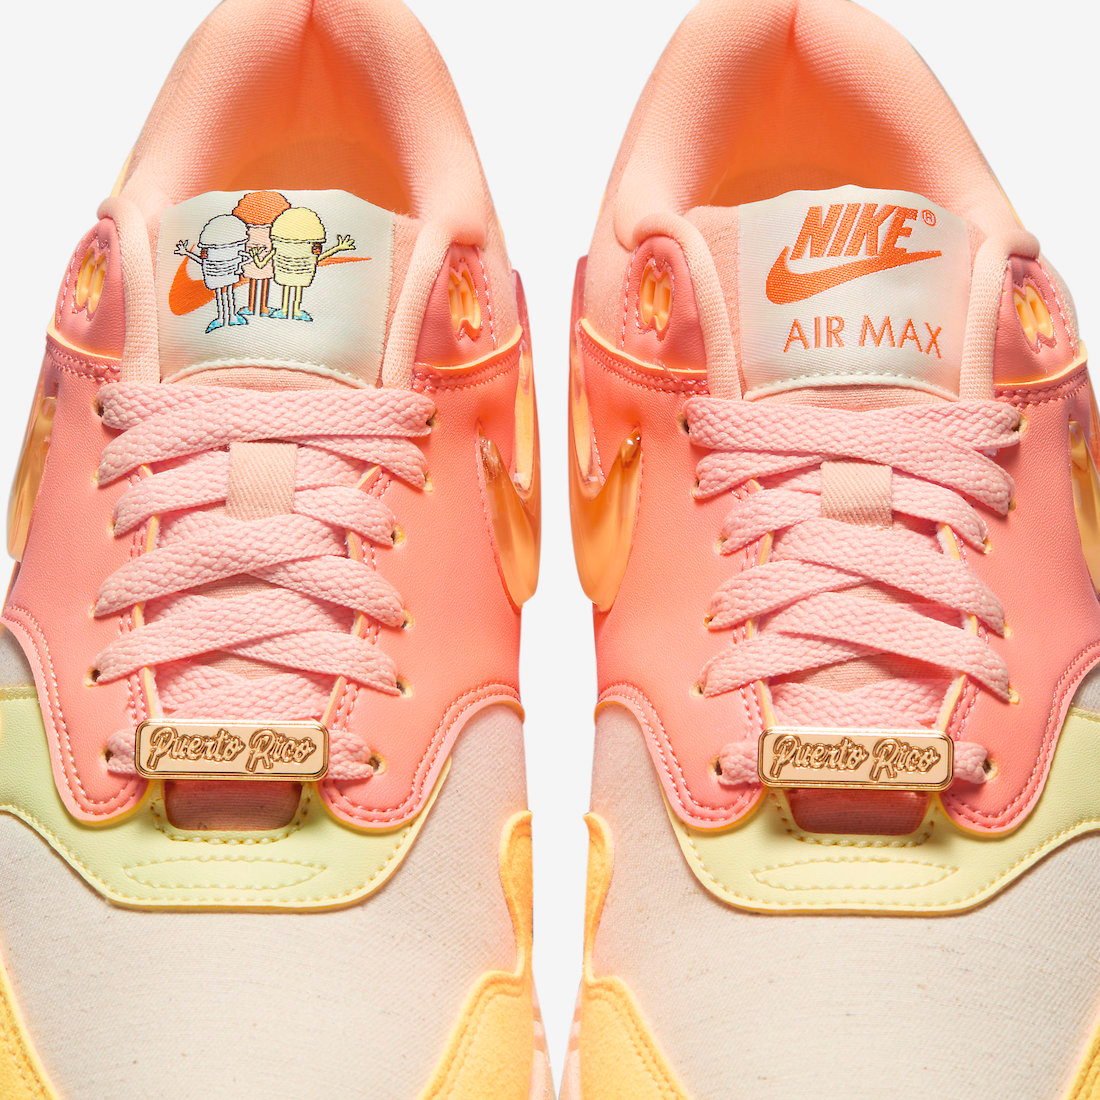 Nike-Air-Max-1-Puerto-Rico-Orange-Frost-Release-Date-9